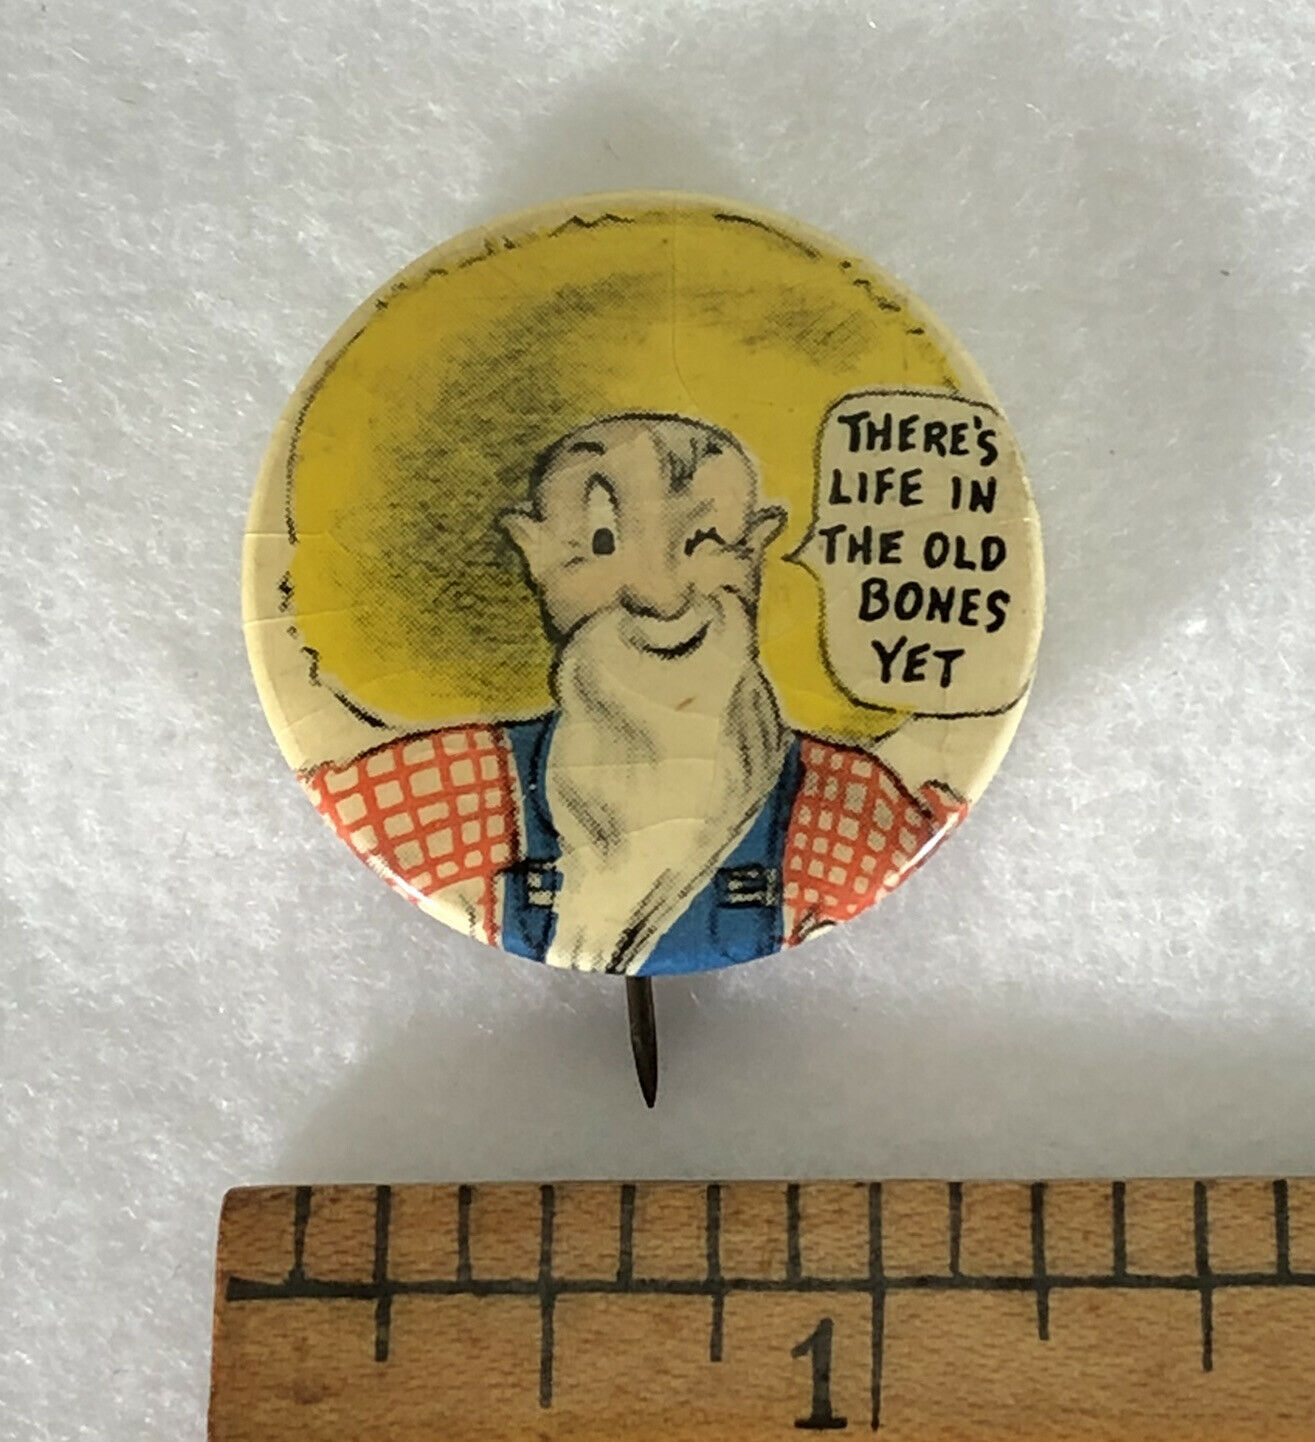 Rare Vintage 1930’s Norcross Hillbilly “life In These Old Bones Yet” Button Pin